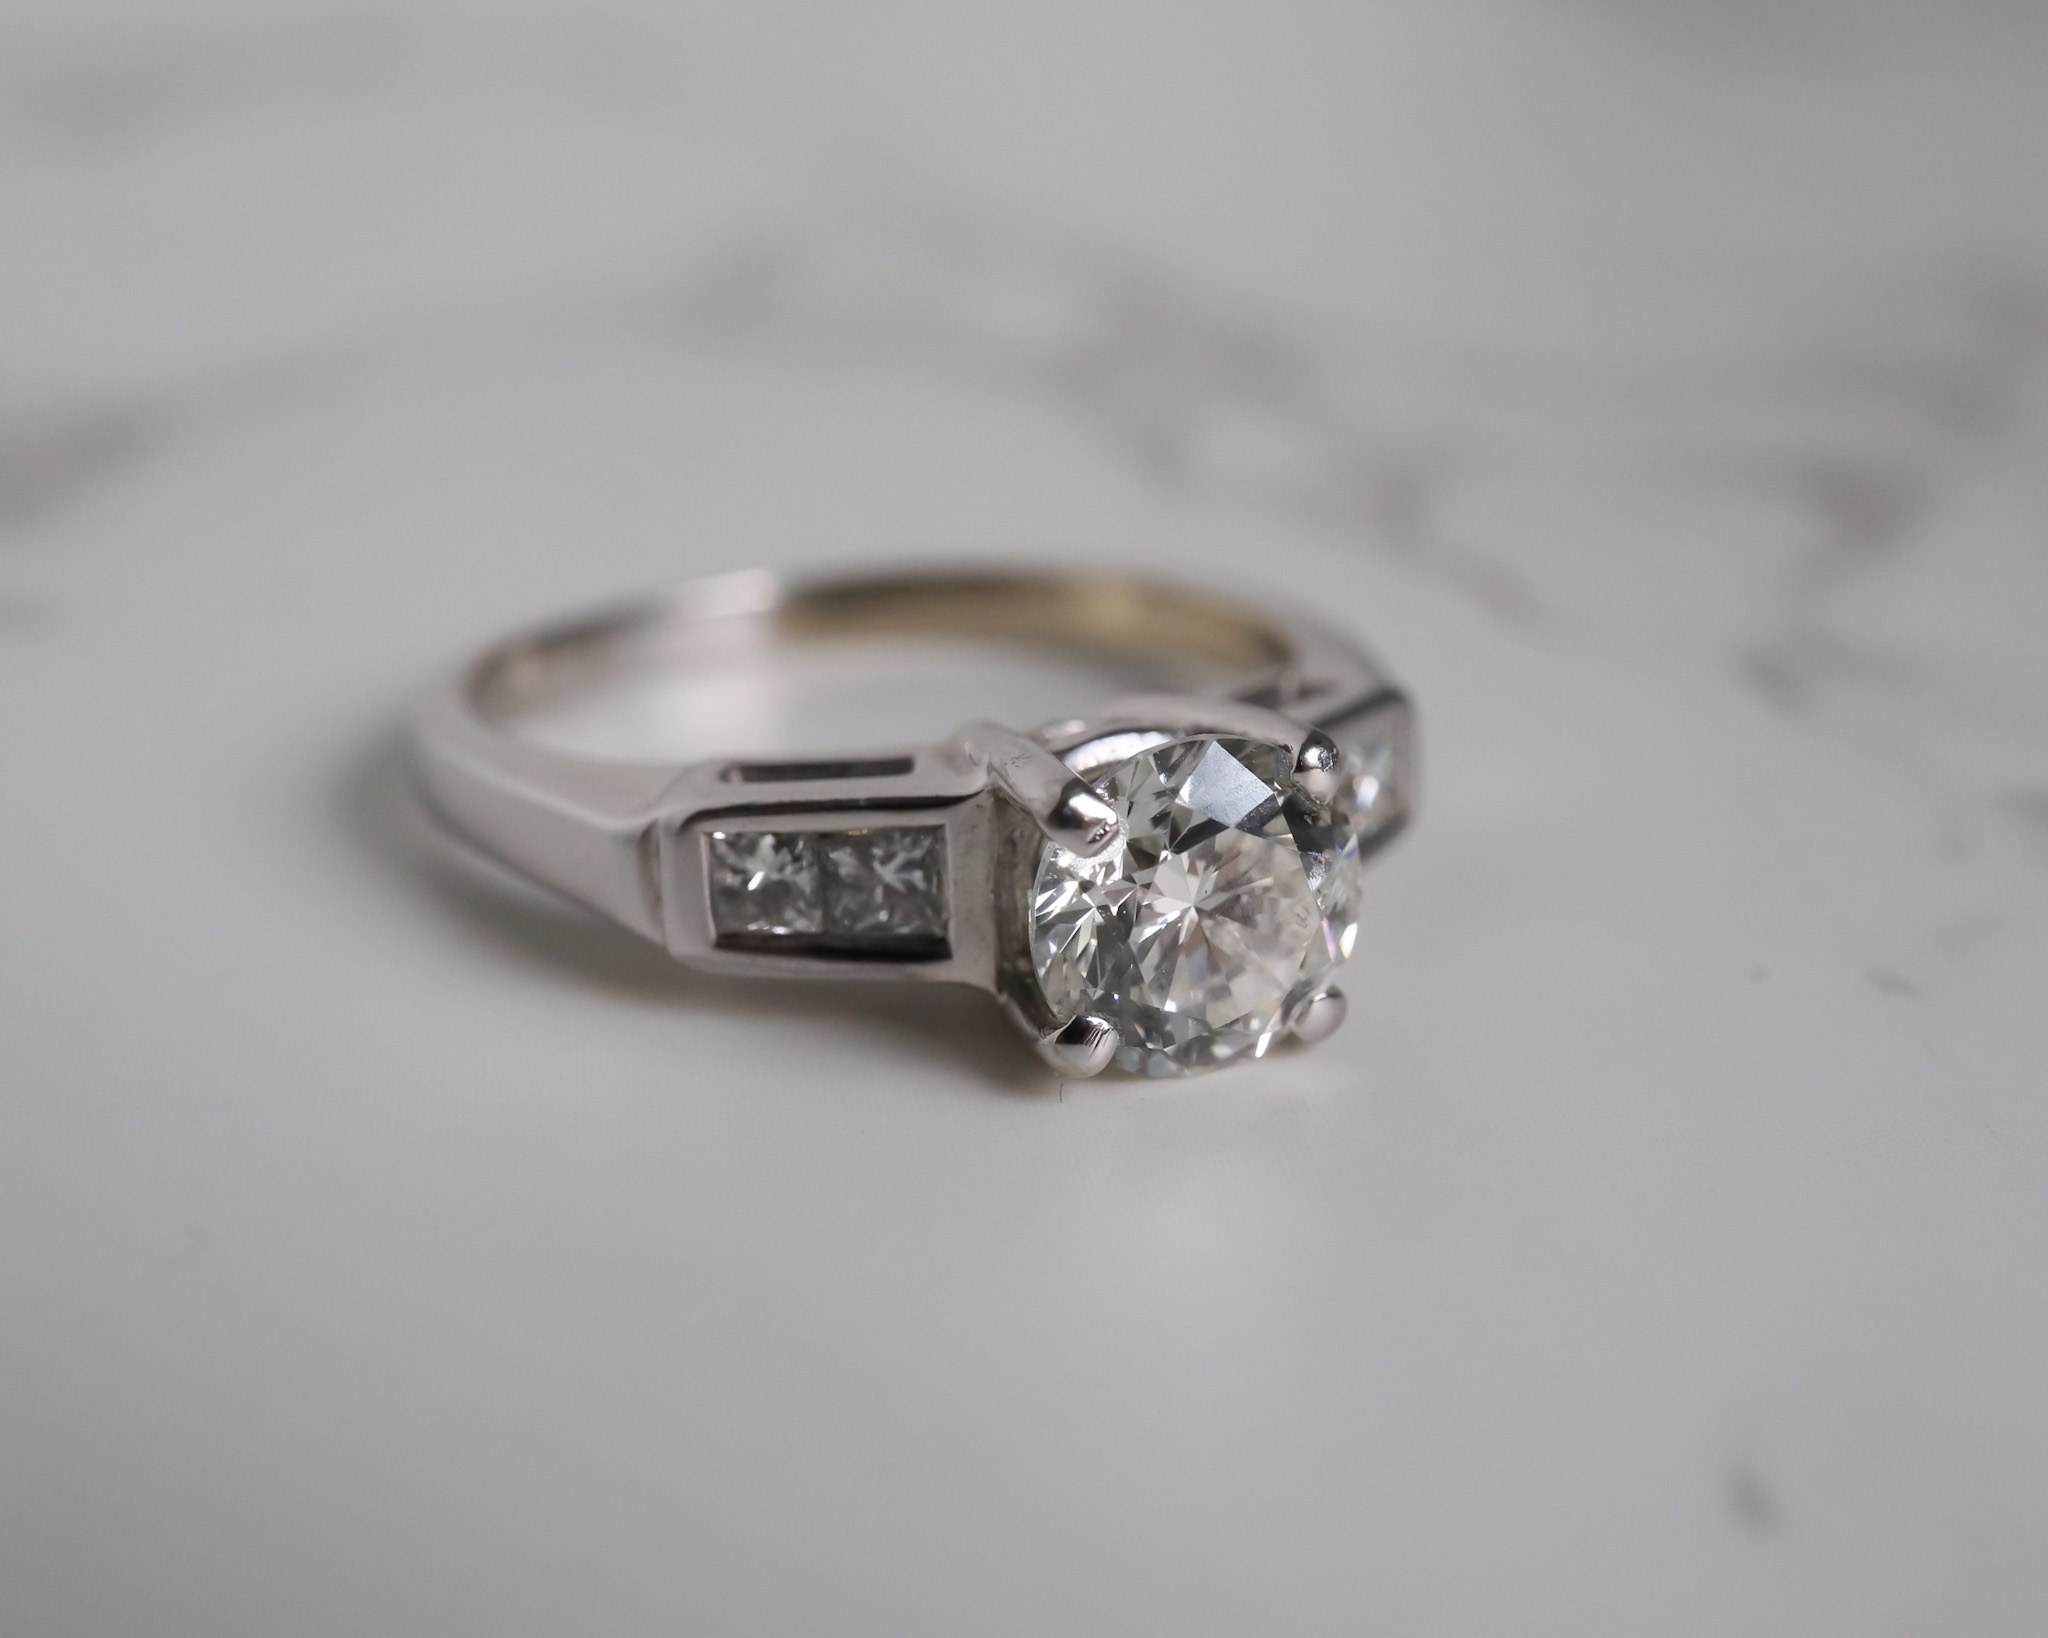 Vintage diamond solitaire ring approx 1ct diamond for sale in Leeds, Yorkshire